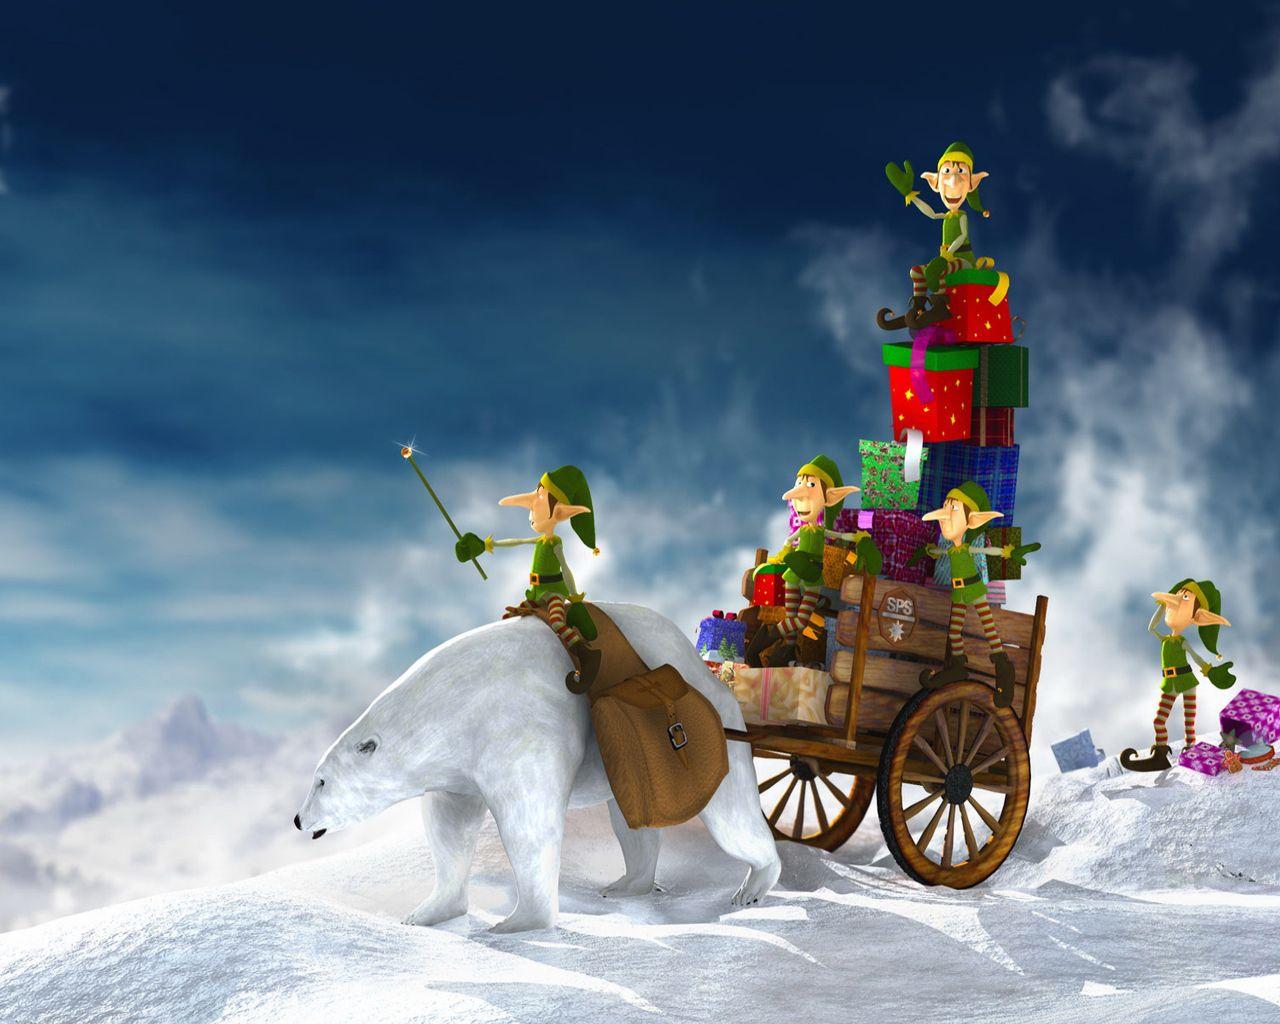 3D Animated Christmas Desktop Wallpaper. Some more collection is